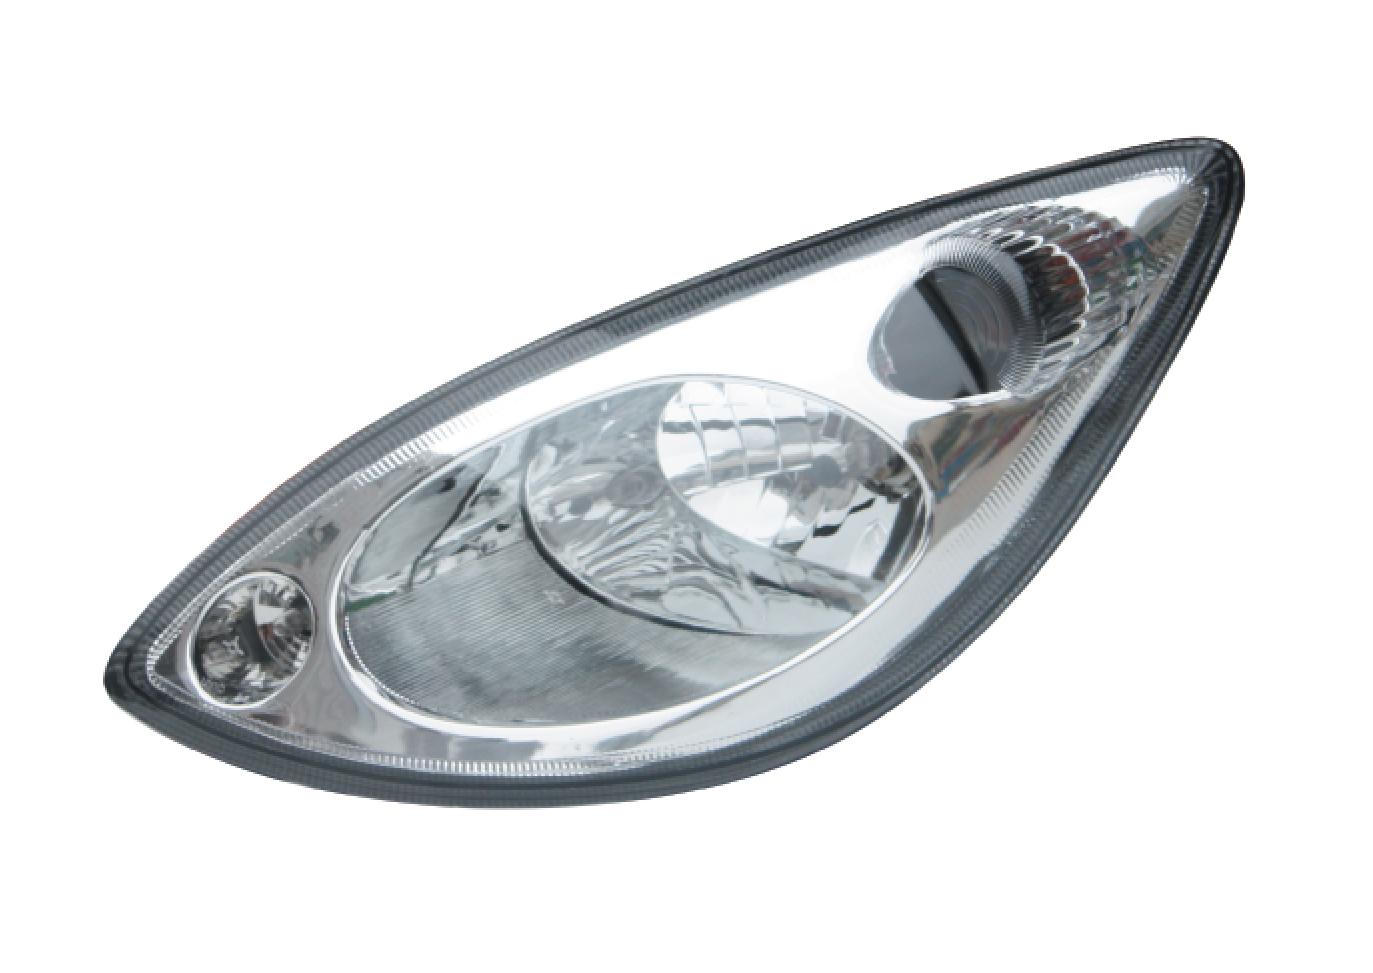 Reliable Auto Lamp - Enhance Visibility and Safety on the Road